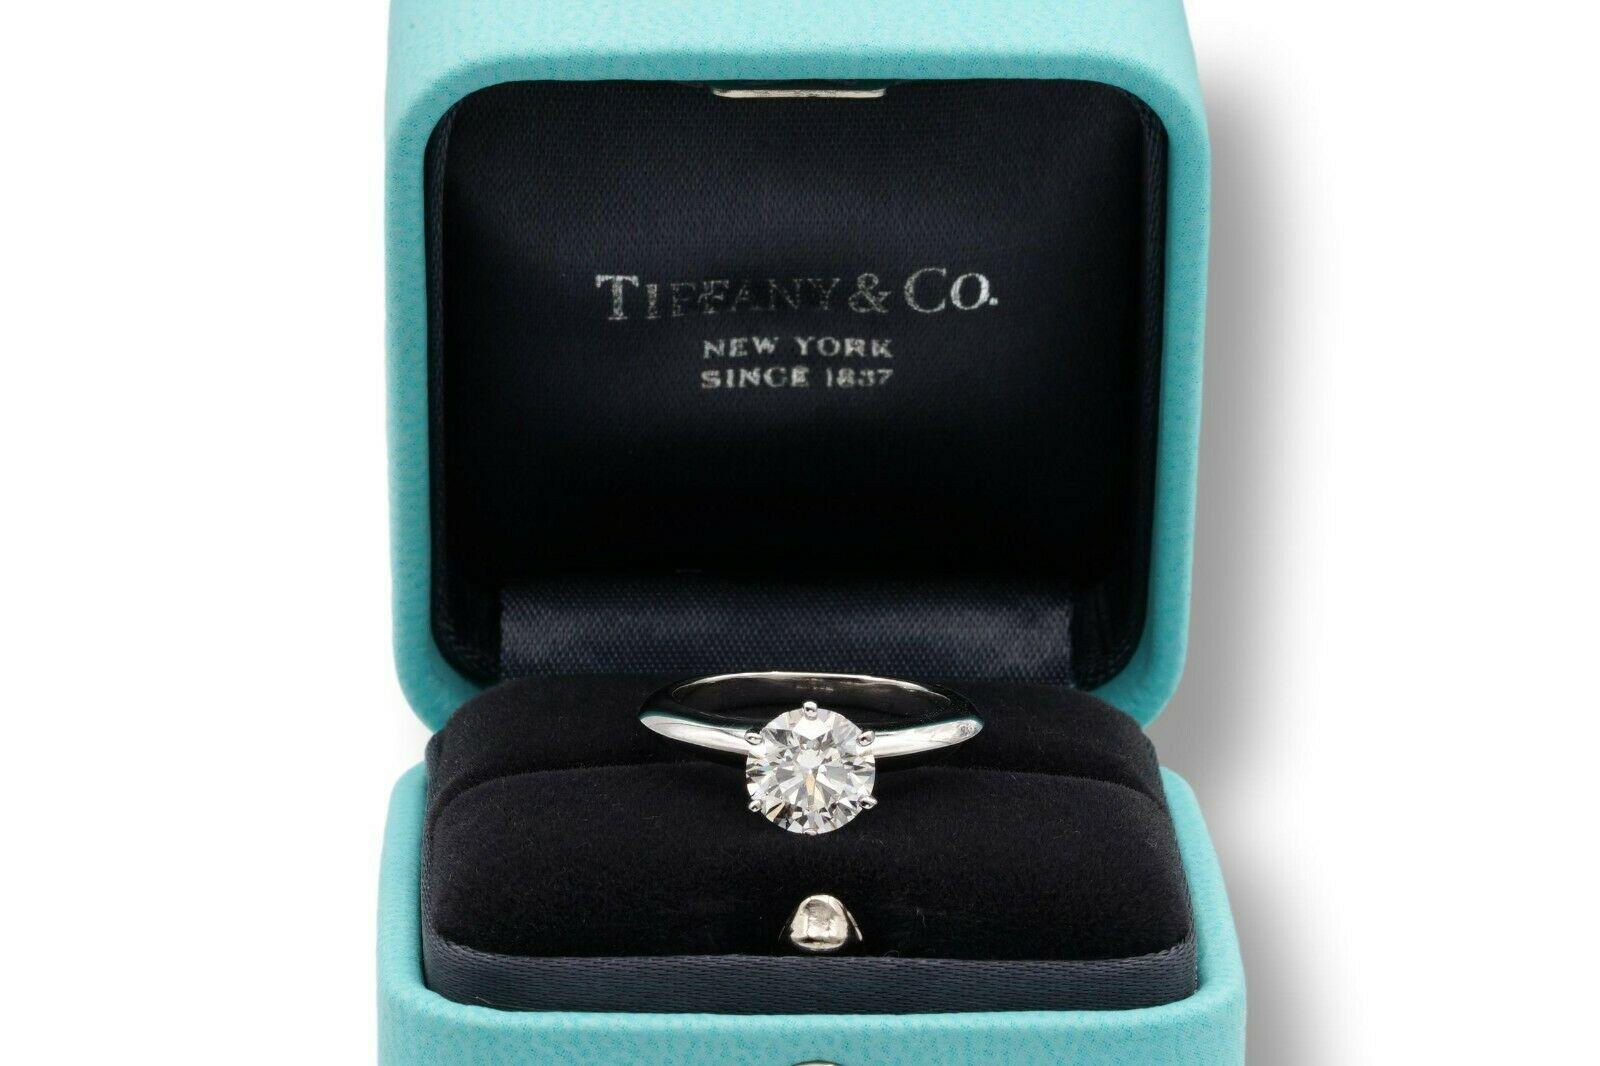 For 50% hold deposit on this ring for Florian. Balance to be paid by Friday 7/23. Total $14,800.

Tiffany & Co Round Brilliant Classic Solitaire Engagement Ring featuring a 1.36 ct Center G color, VS1 clarity, finely crafted in a 6 prong Platinum